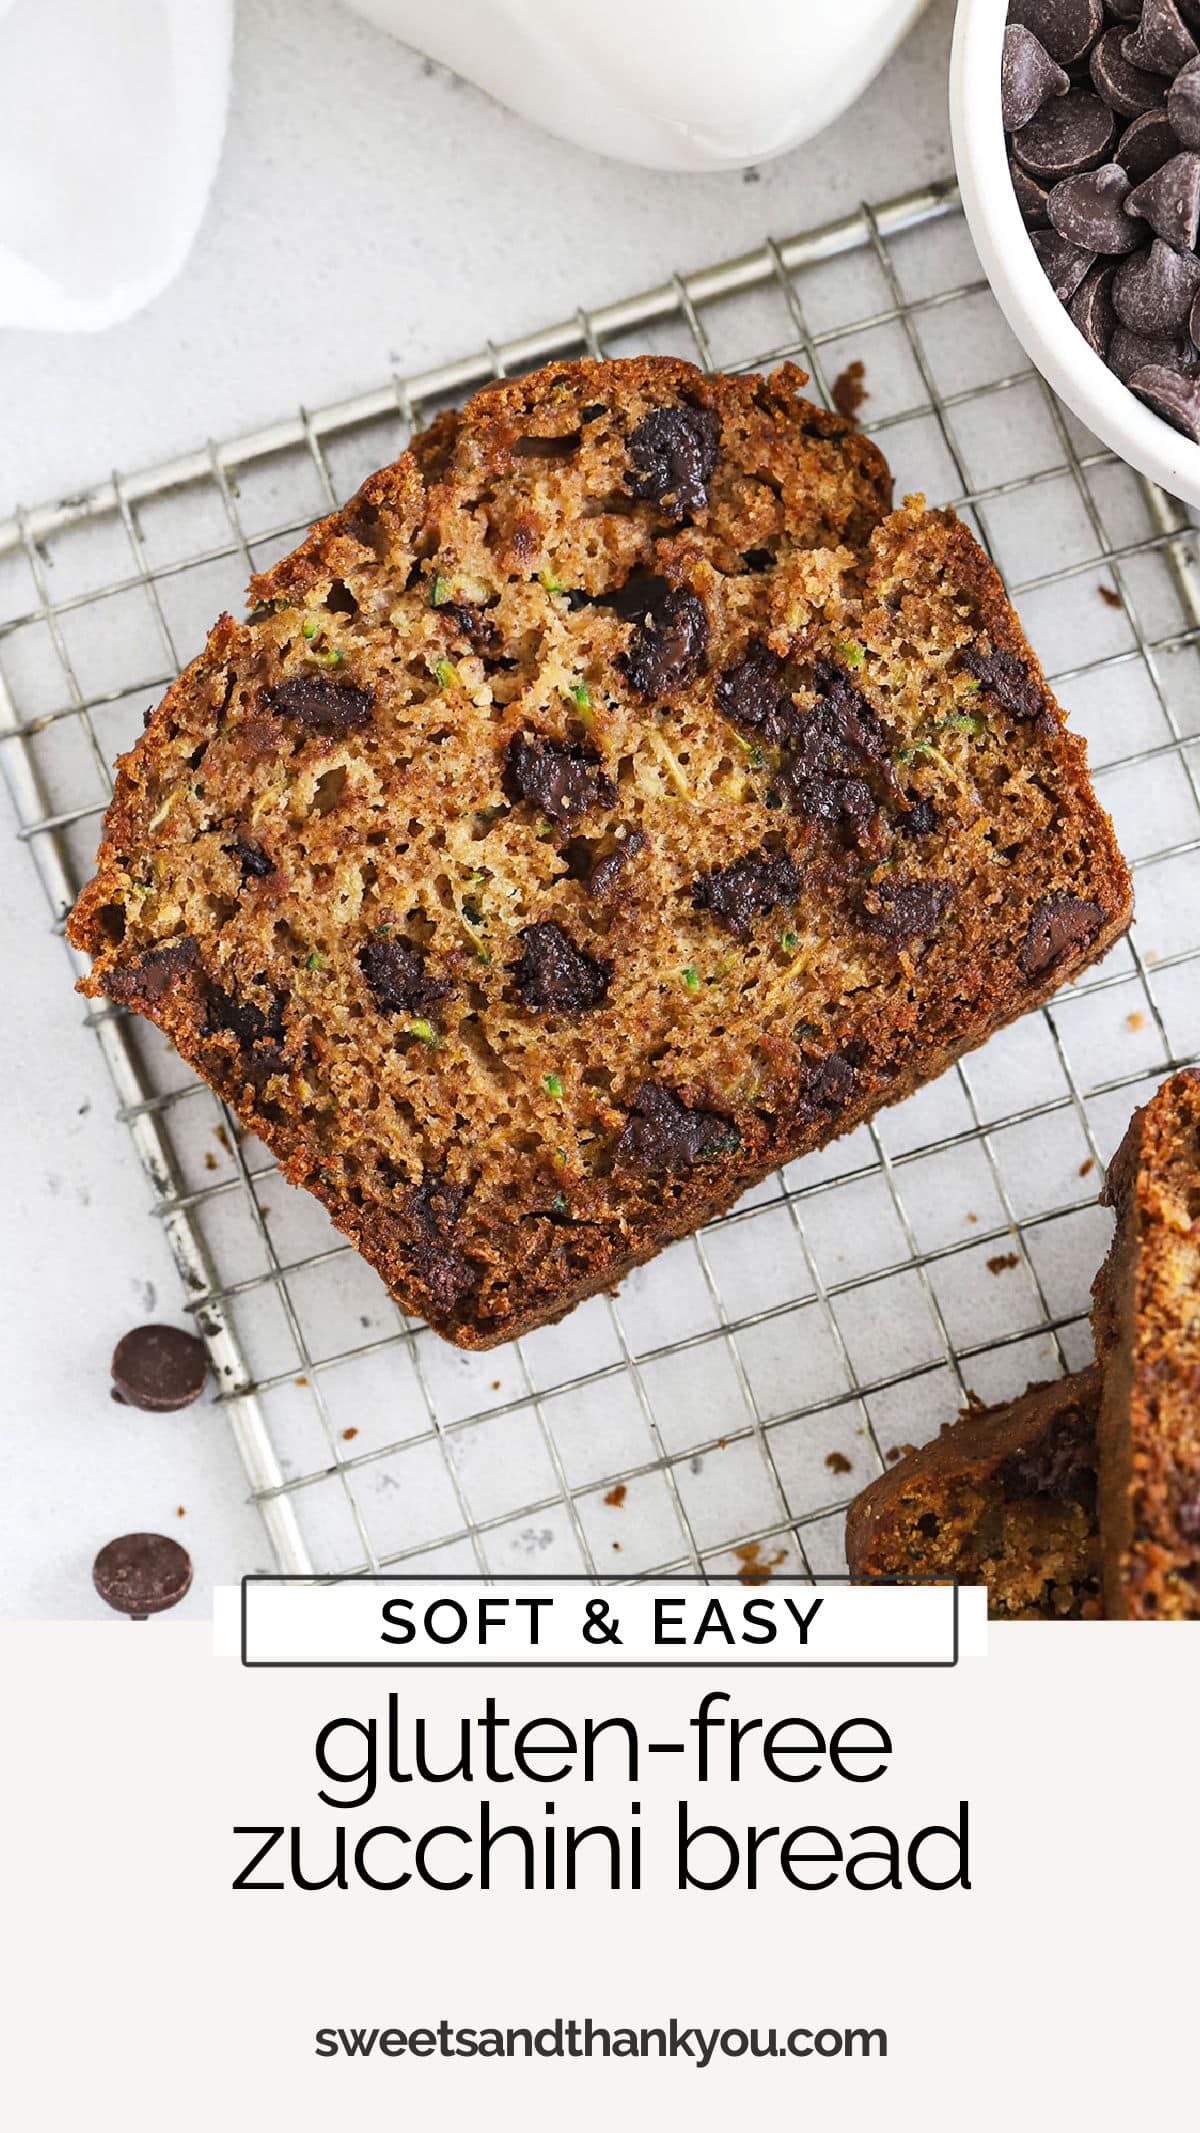 Summer is the perfect time to make this easy gluten-free zucchini bread recipe! You'll love the blend of spices, soft texture, and chocolate chips (or nuts) in every bite! / moist gluten free zucchini bread recipe / the best gluten-free zucchini bread recipe / gluten free chocolate chip zucchini bread / gluten free zucchini bread with walnuts / 